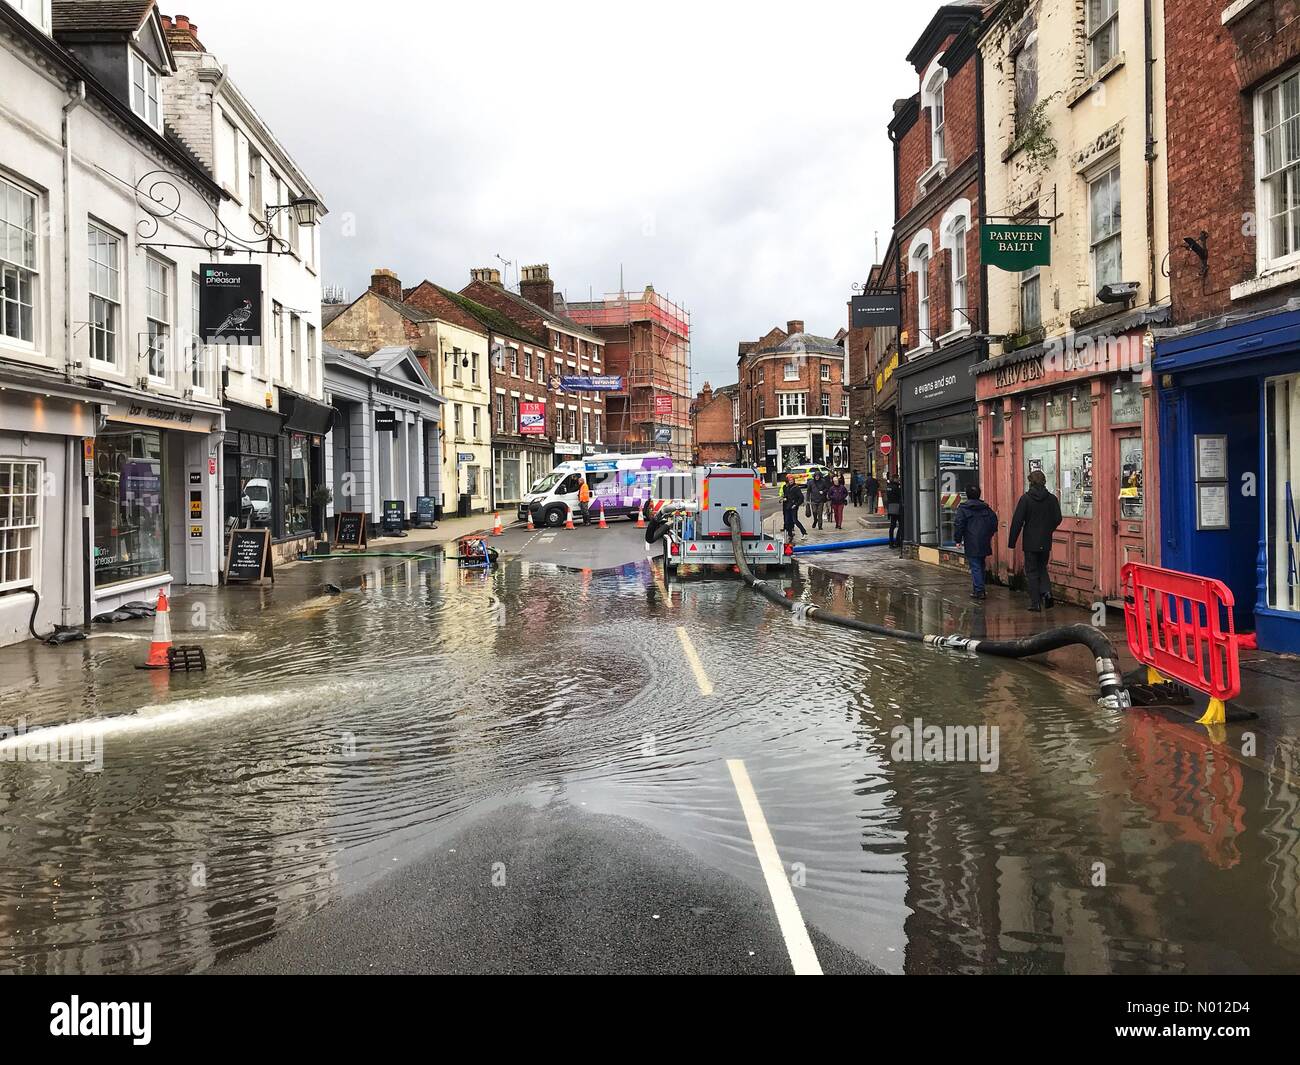 UK Weather Flooding in Shrewsbury - Tuesday 25th February 2020. Flooding and water pumps in Shrewsbury city centre as the River Severn reaches new heights. Photo Steven May/Alamy Live News Credit: Steven May/StockimoNews/Alamy Live News Stock Photo